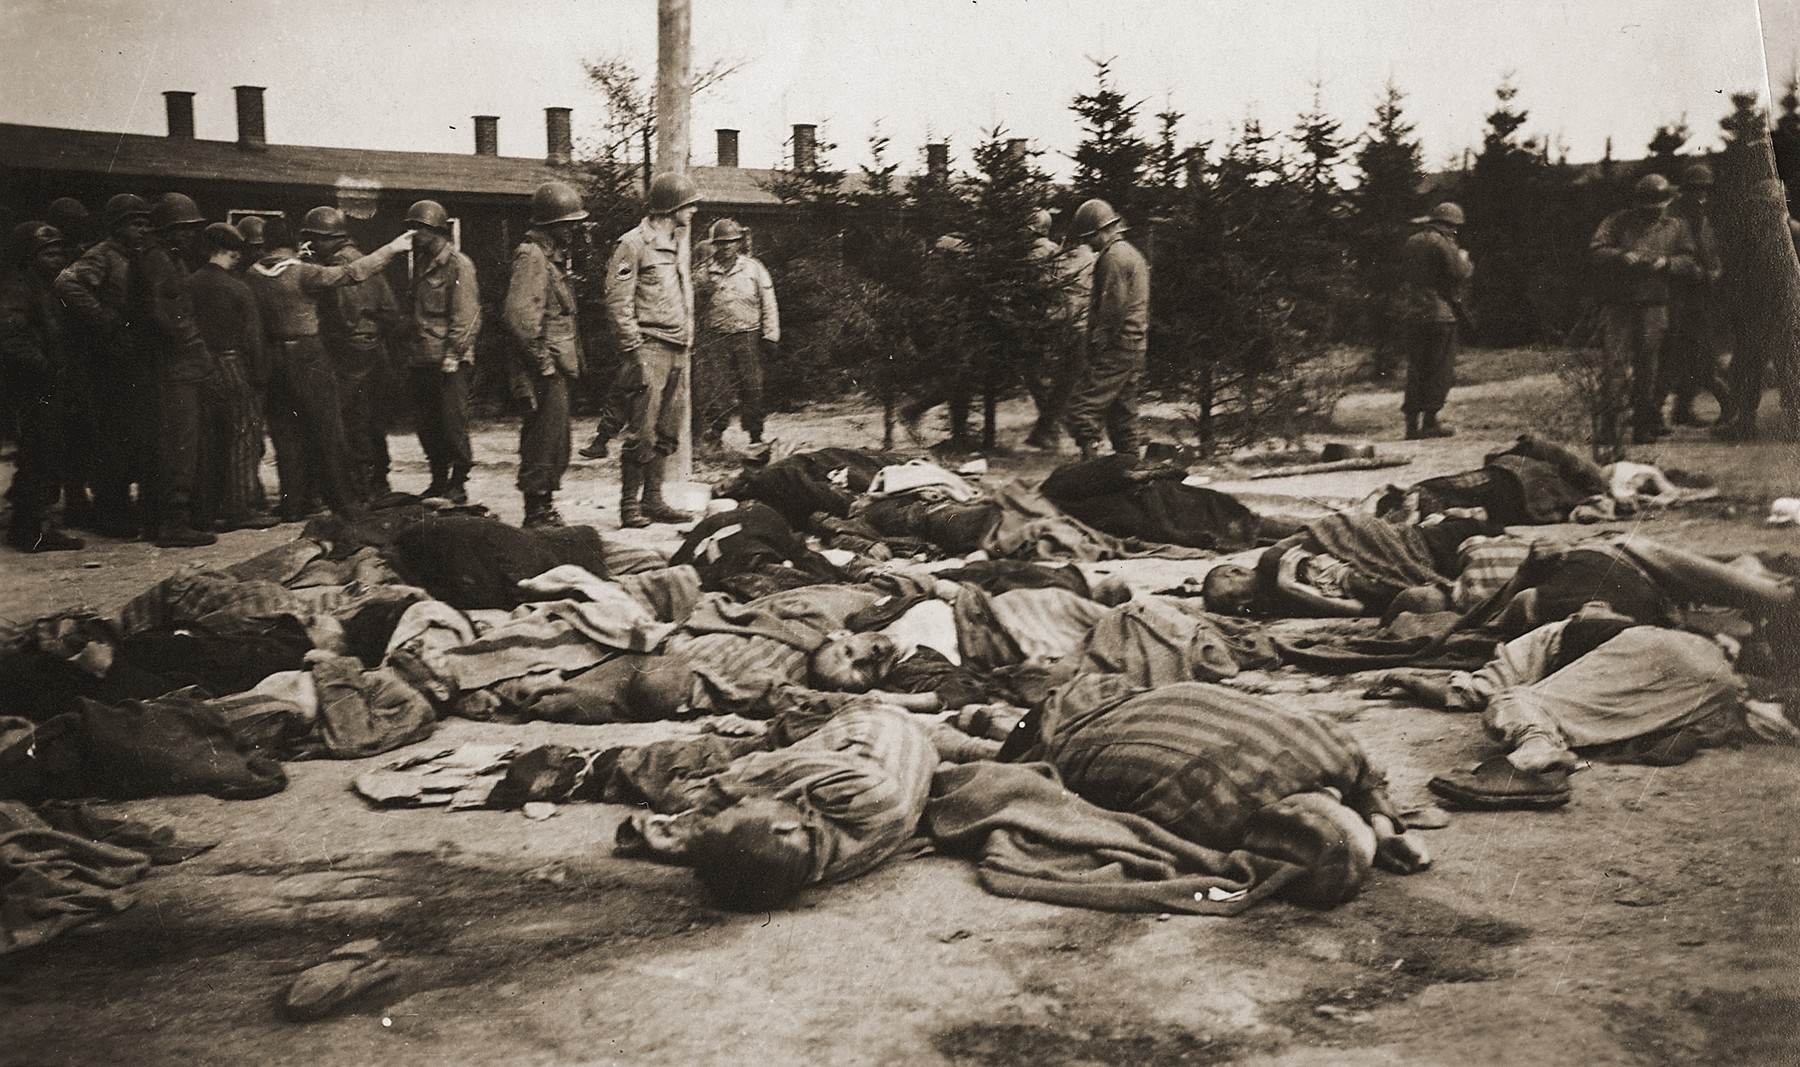 American soldiers view the bodies of prisoners shot by the SS during the evacuation of the Ohrdruf concentration camp.